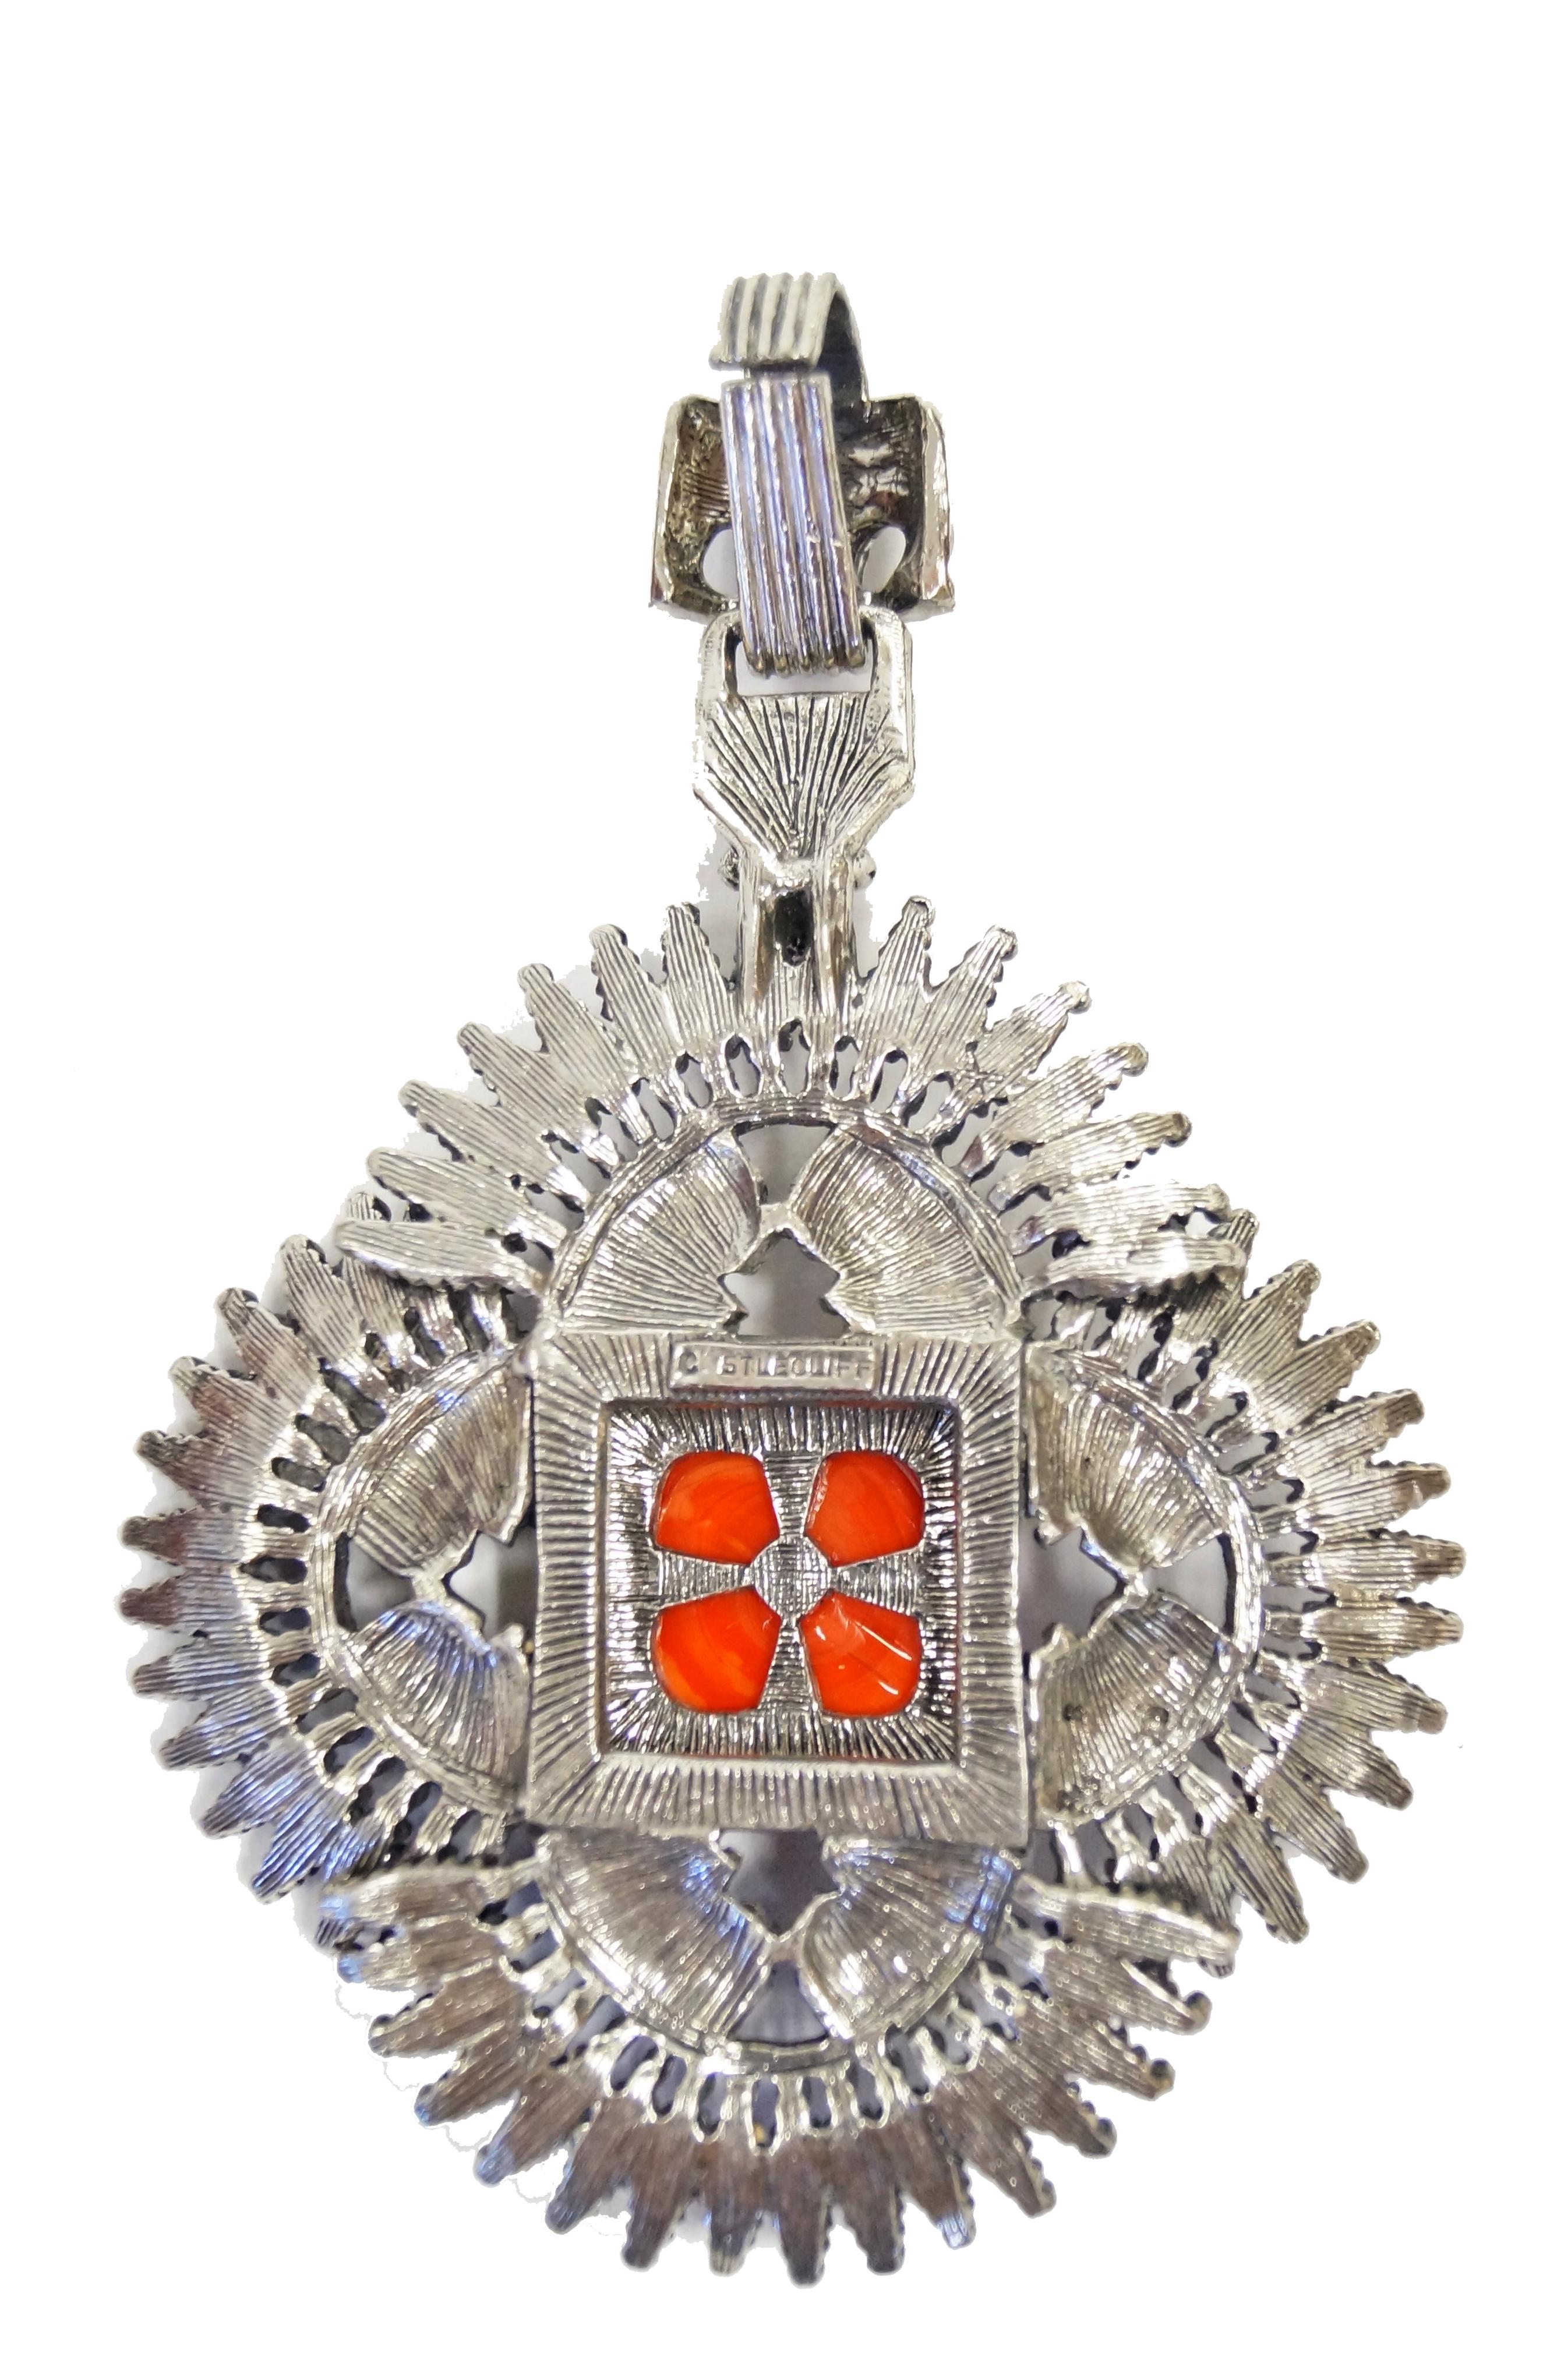 Iconic 1970s VRBA Castlecliff Necklace Pendant For Sale 1